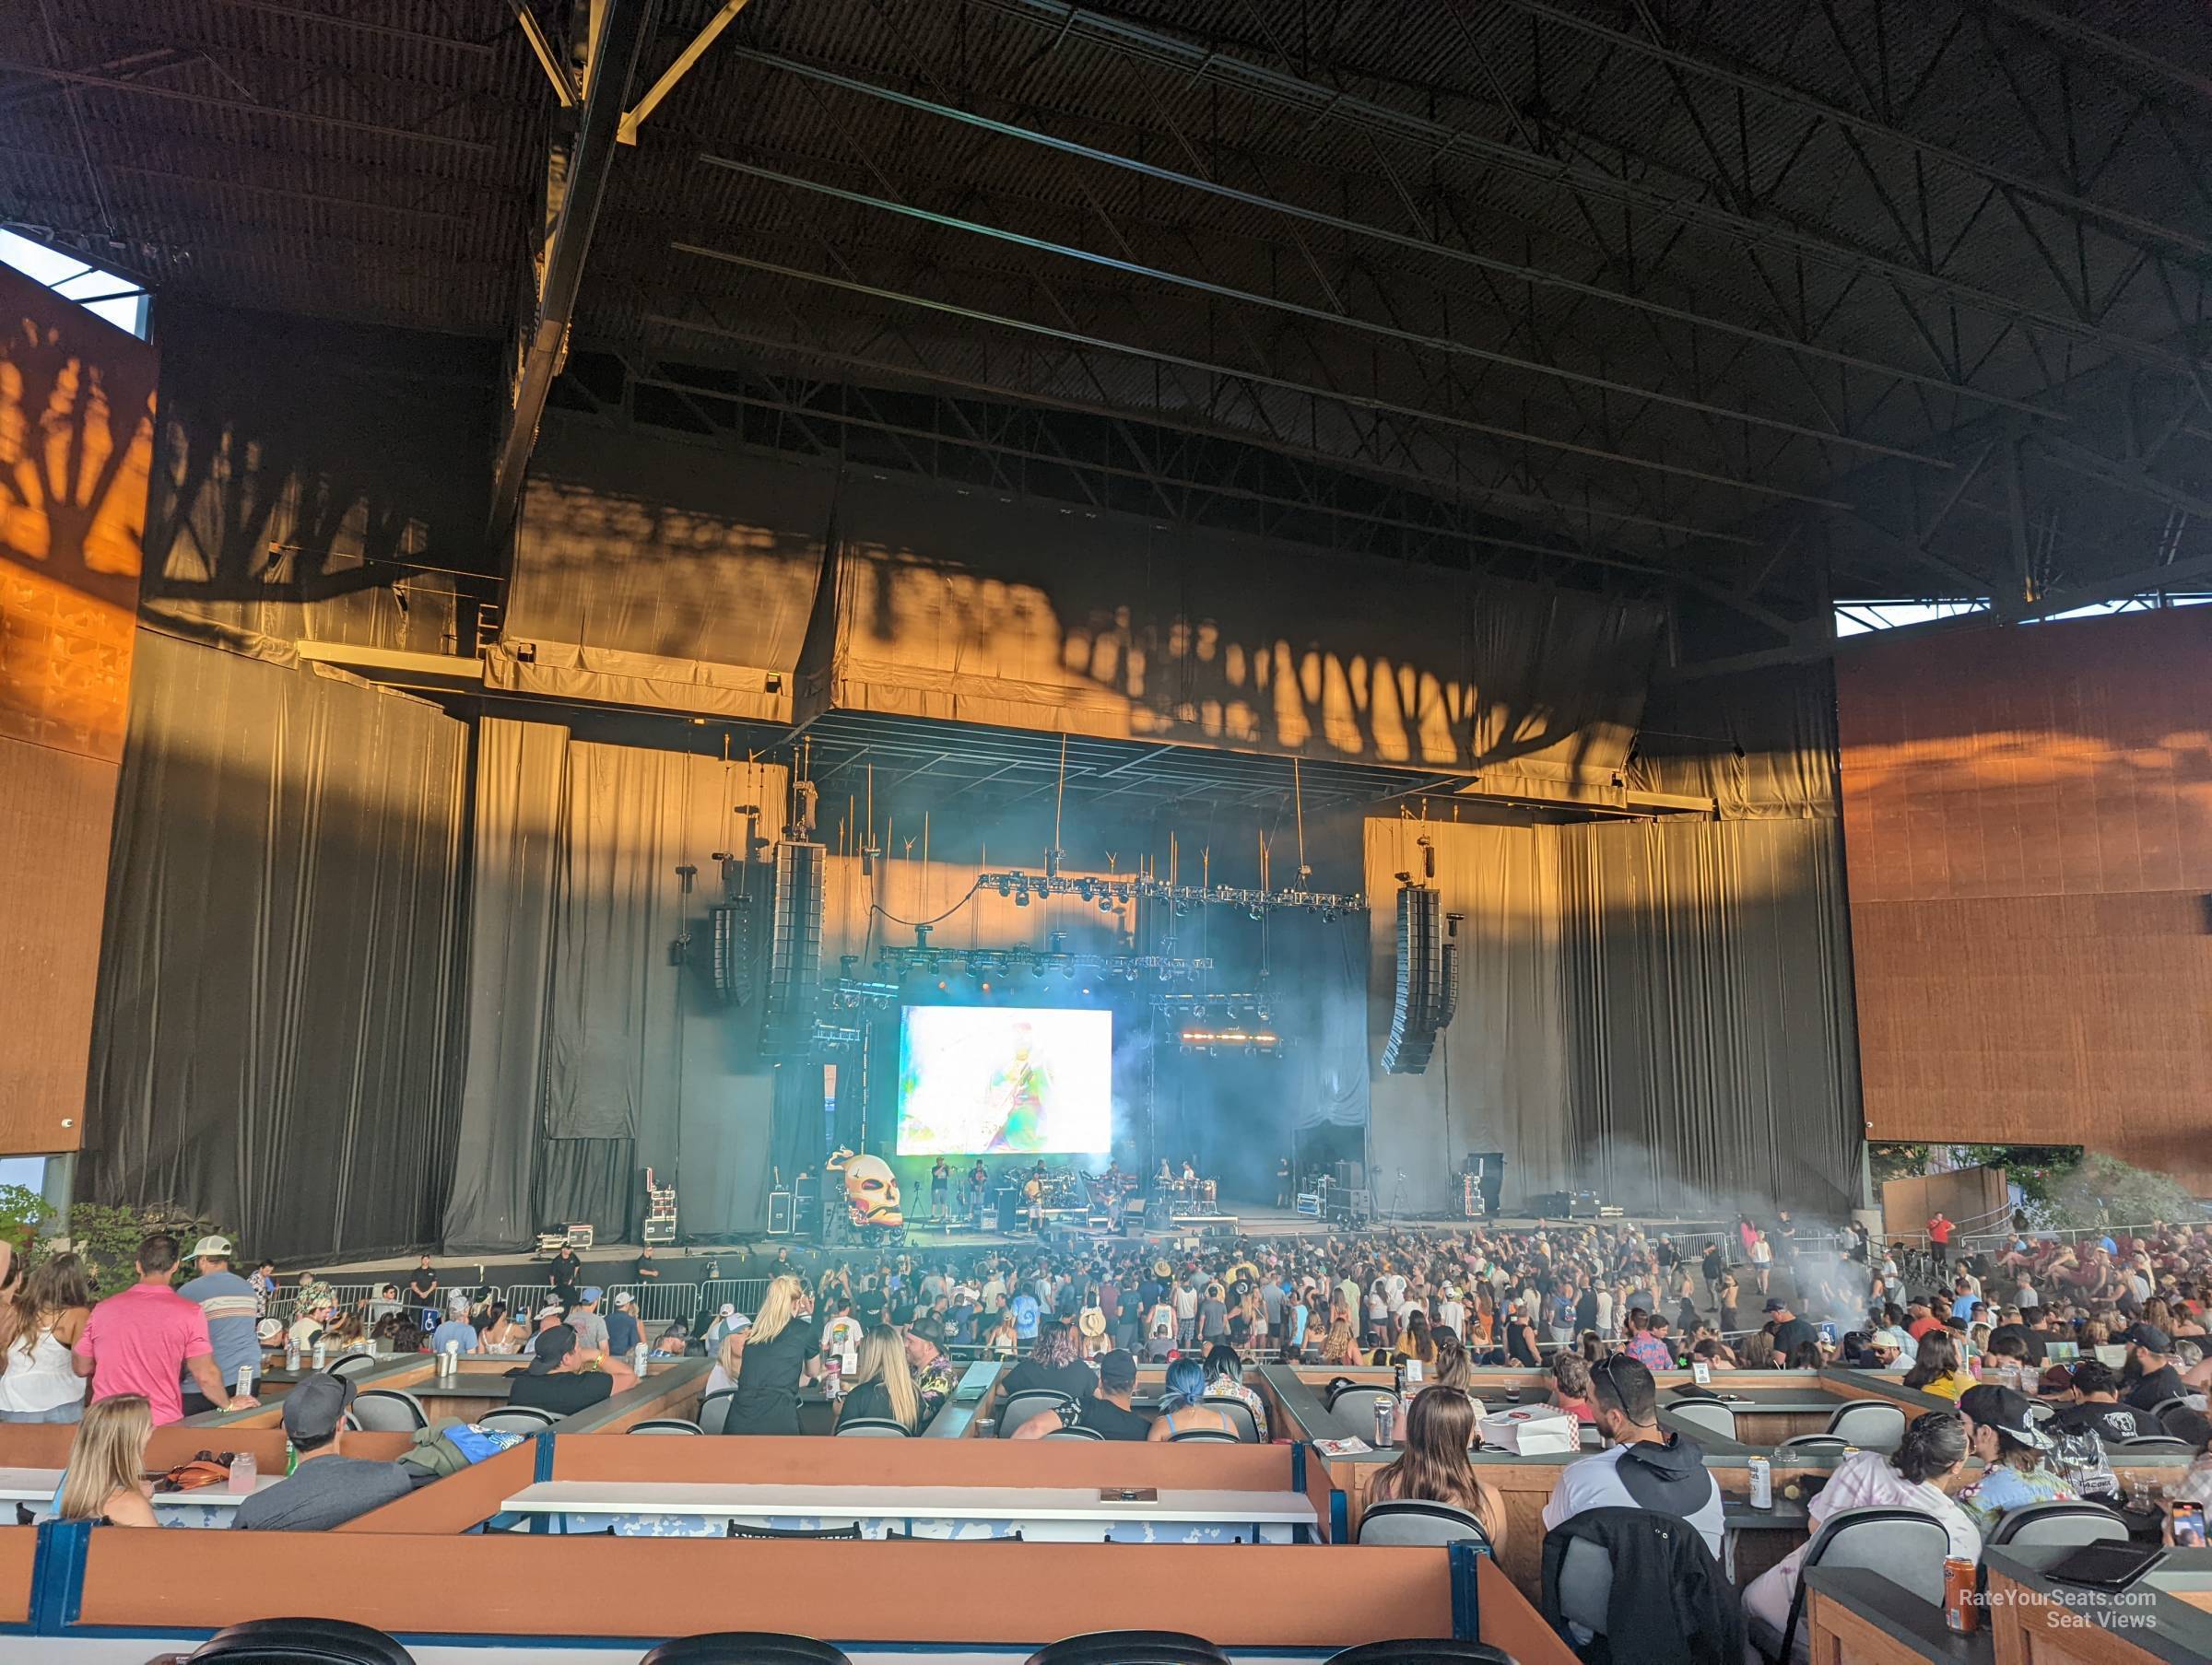 section 209, row 1 seat view  - white river amphitheatre